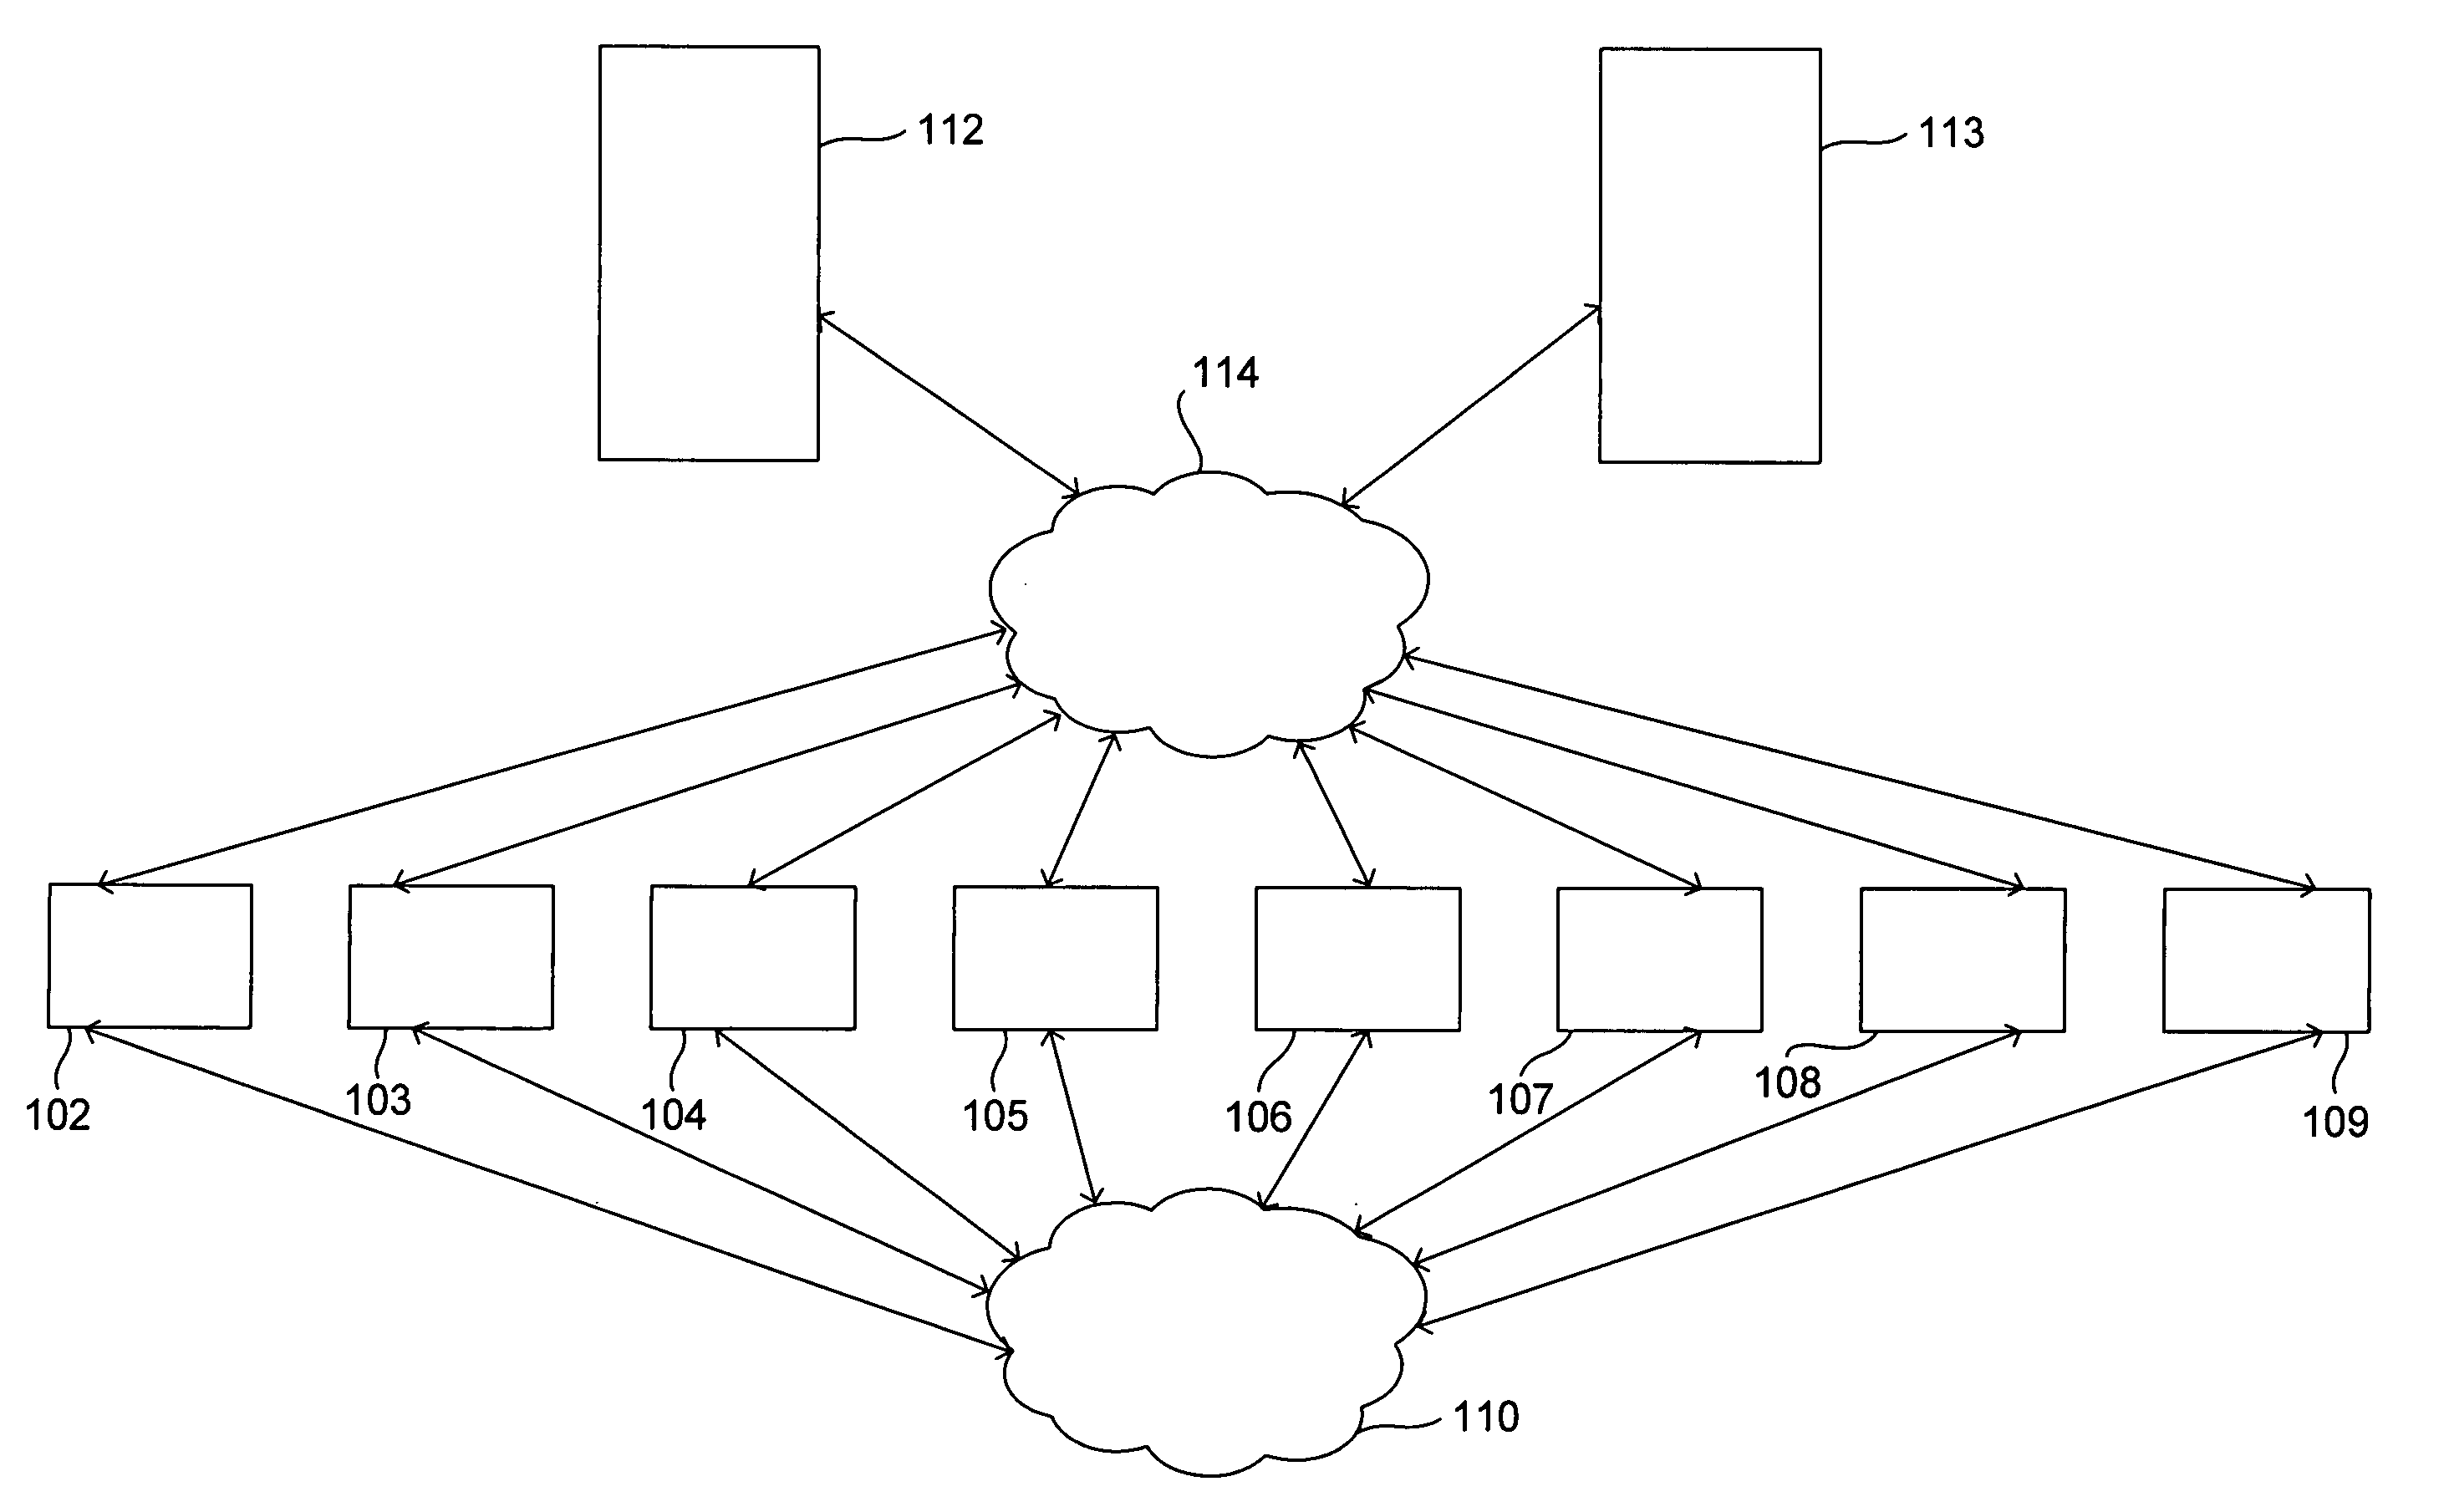 Distributed data-storage system